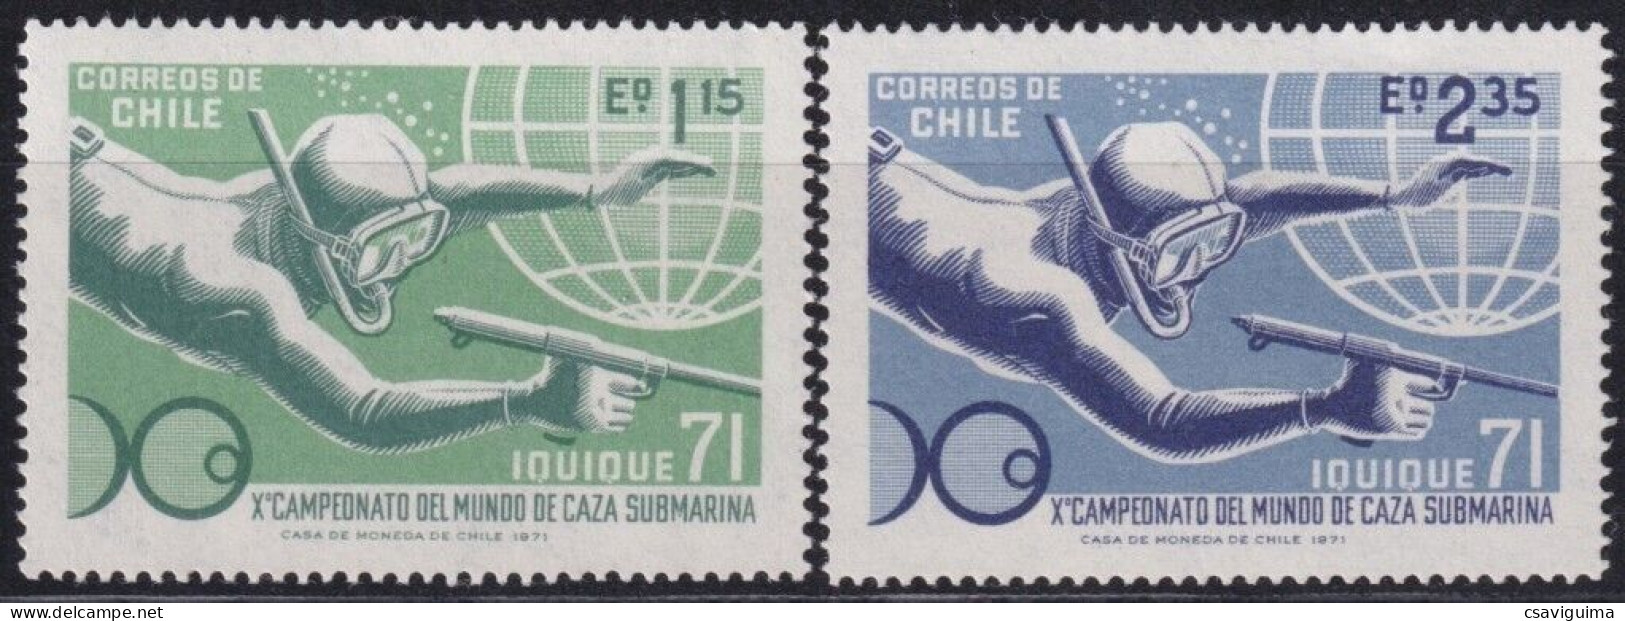 Chile - 1971 - Sport: Diving - Yv 756/57 - Immersione